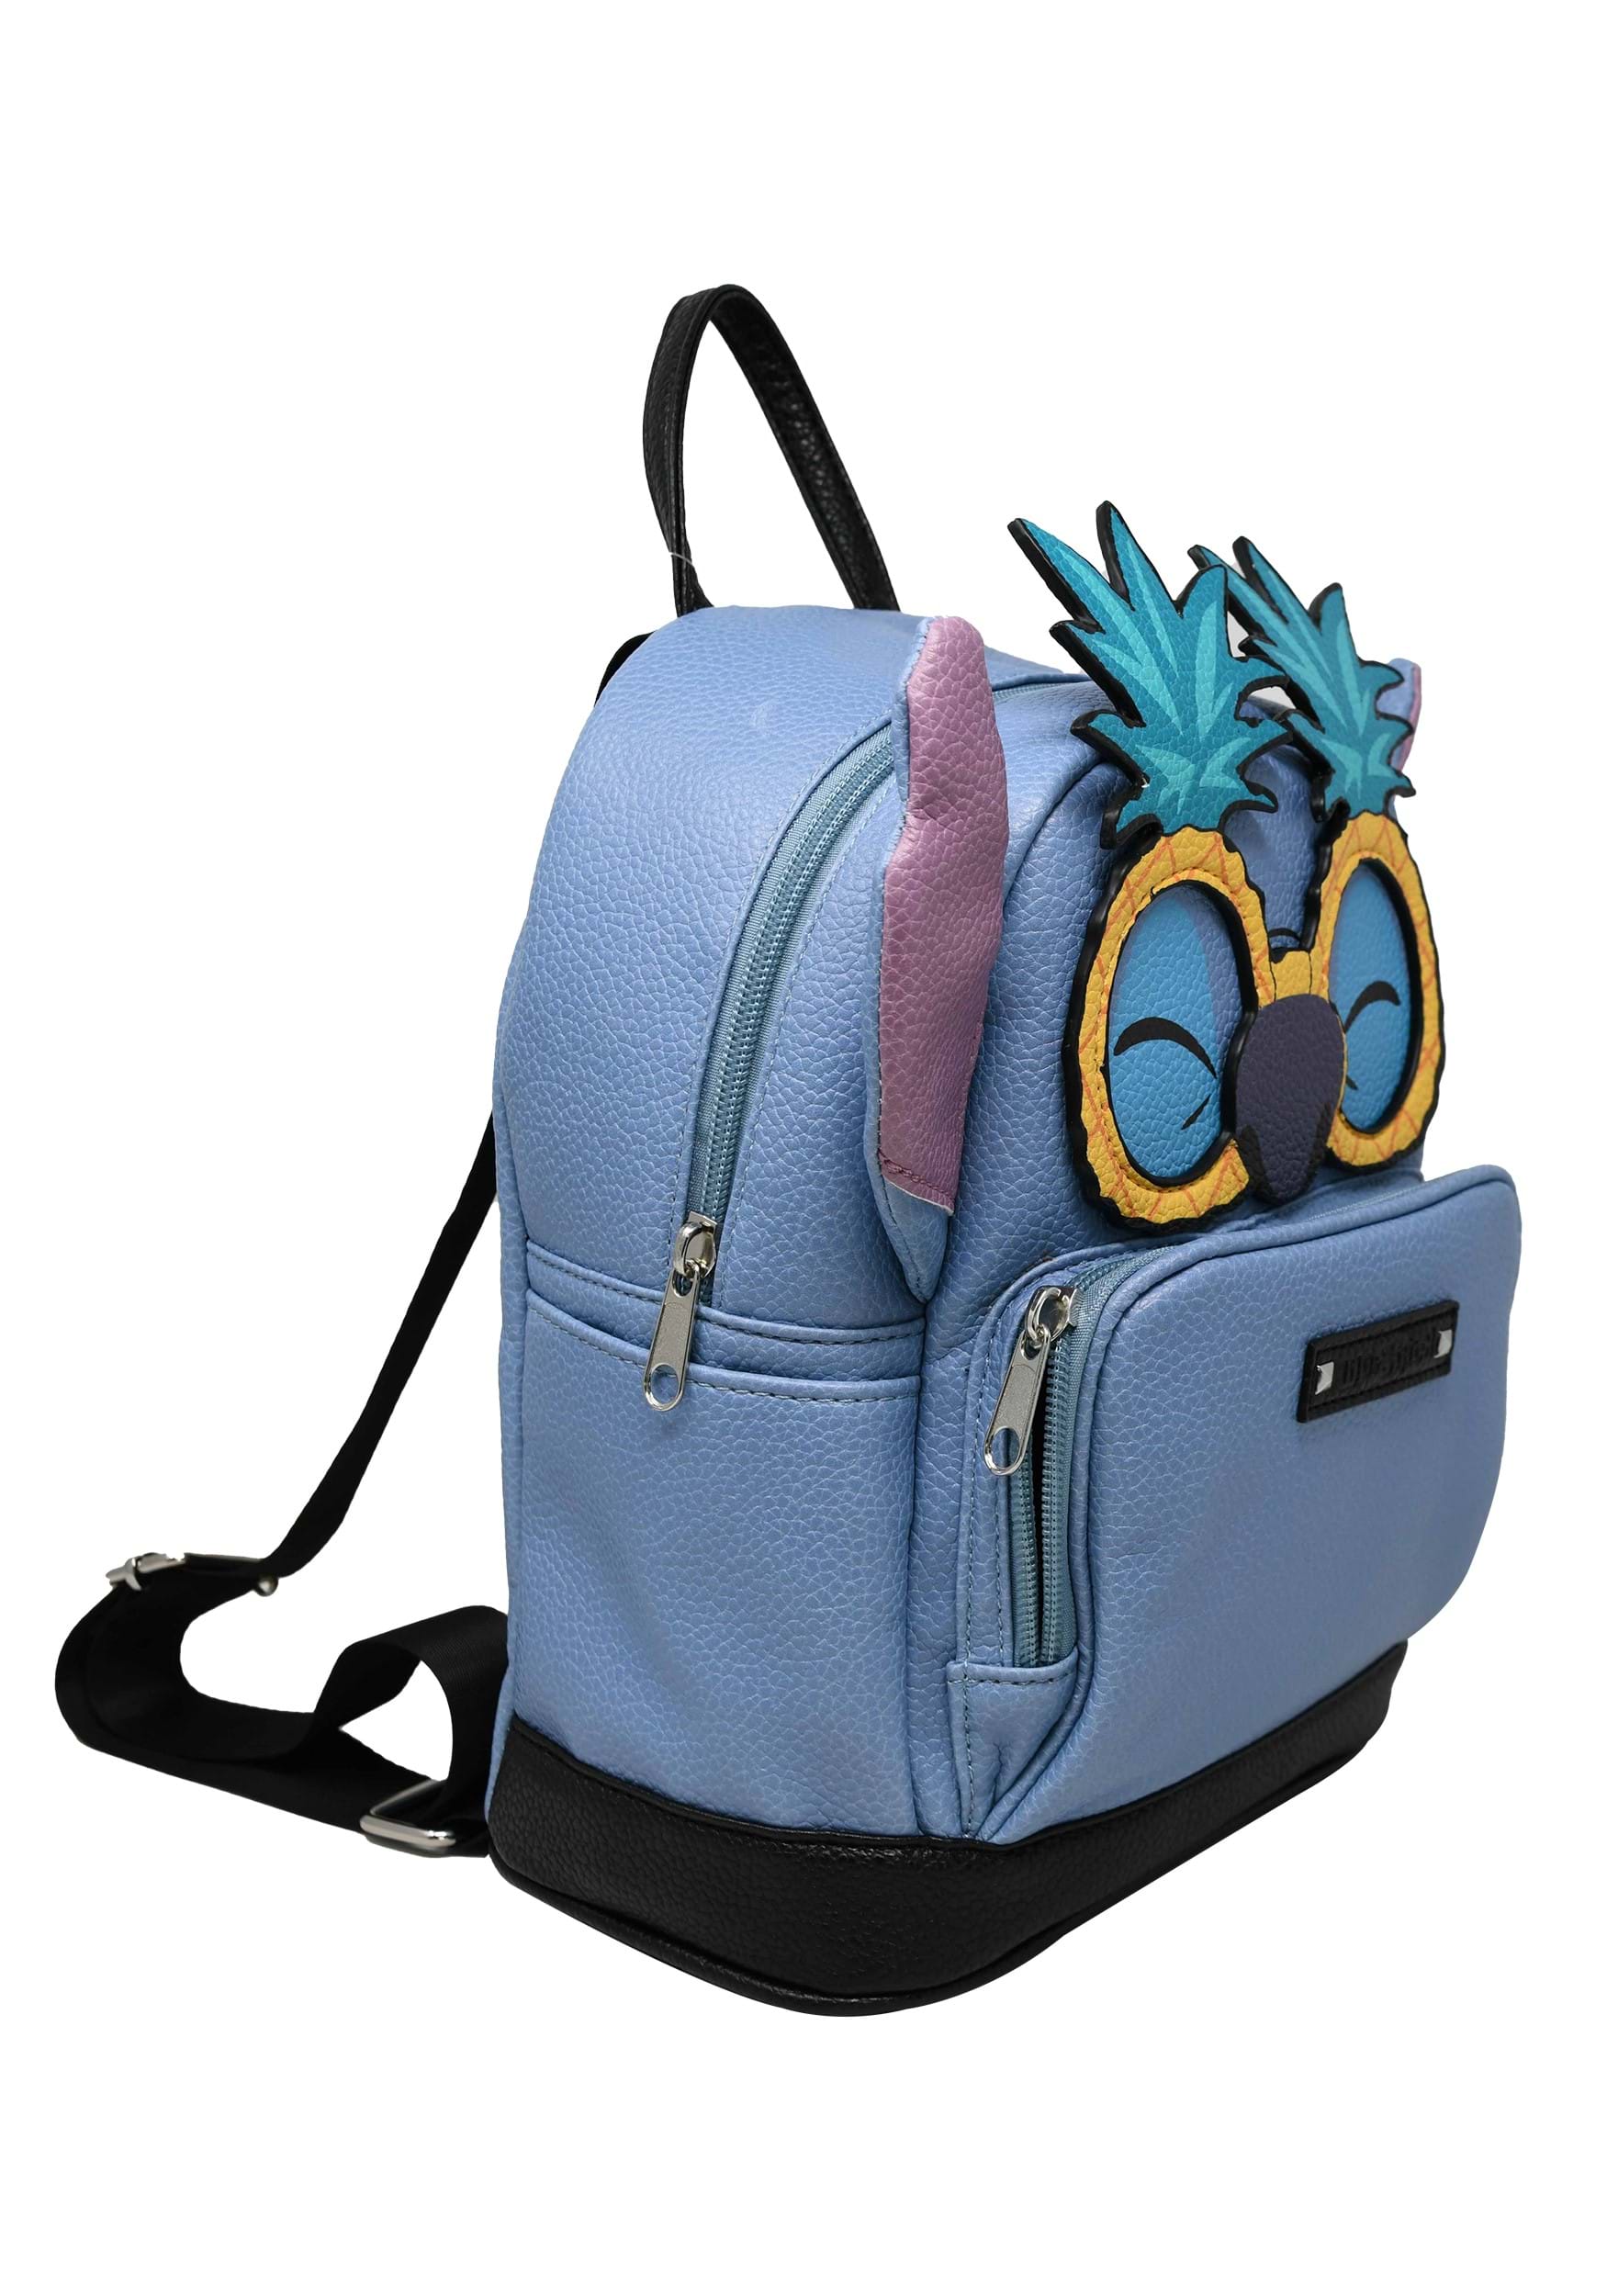 10" Stitch Mini Deluxe Backpack